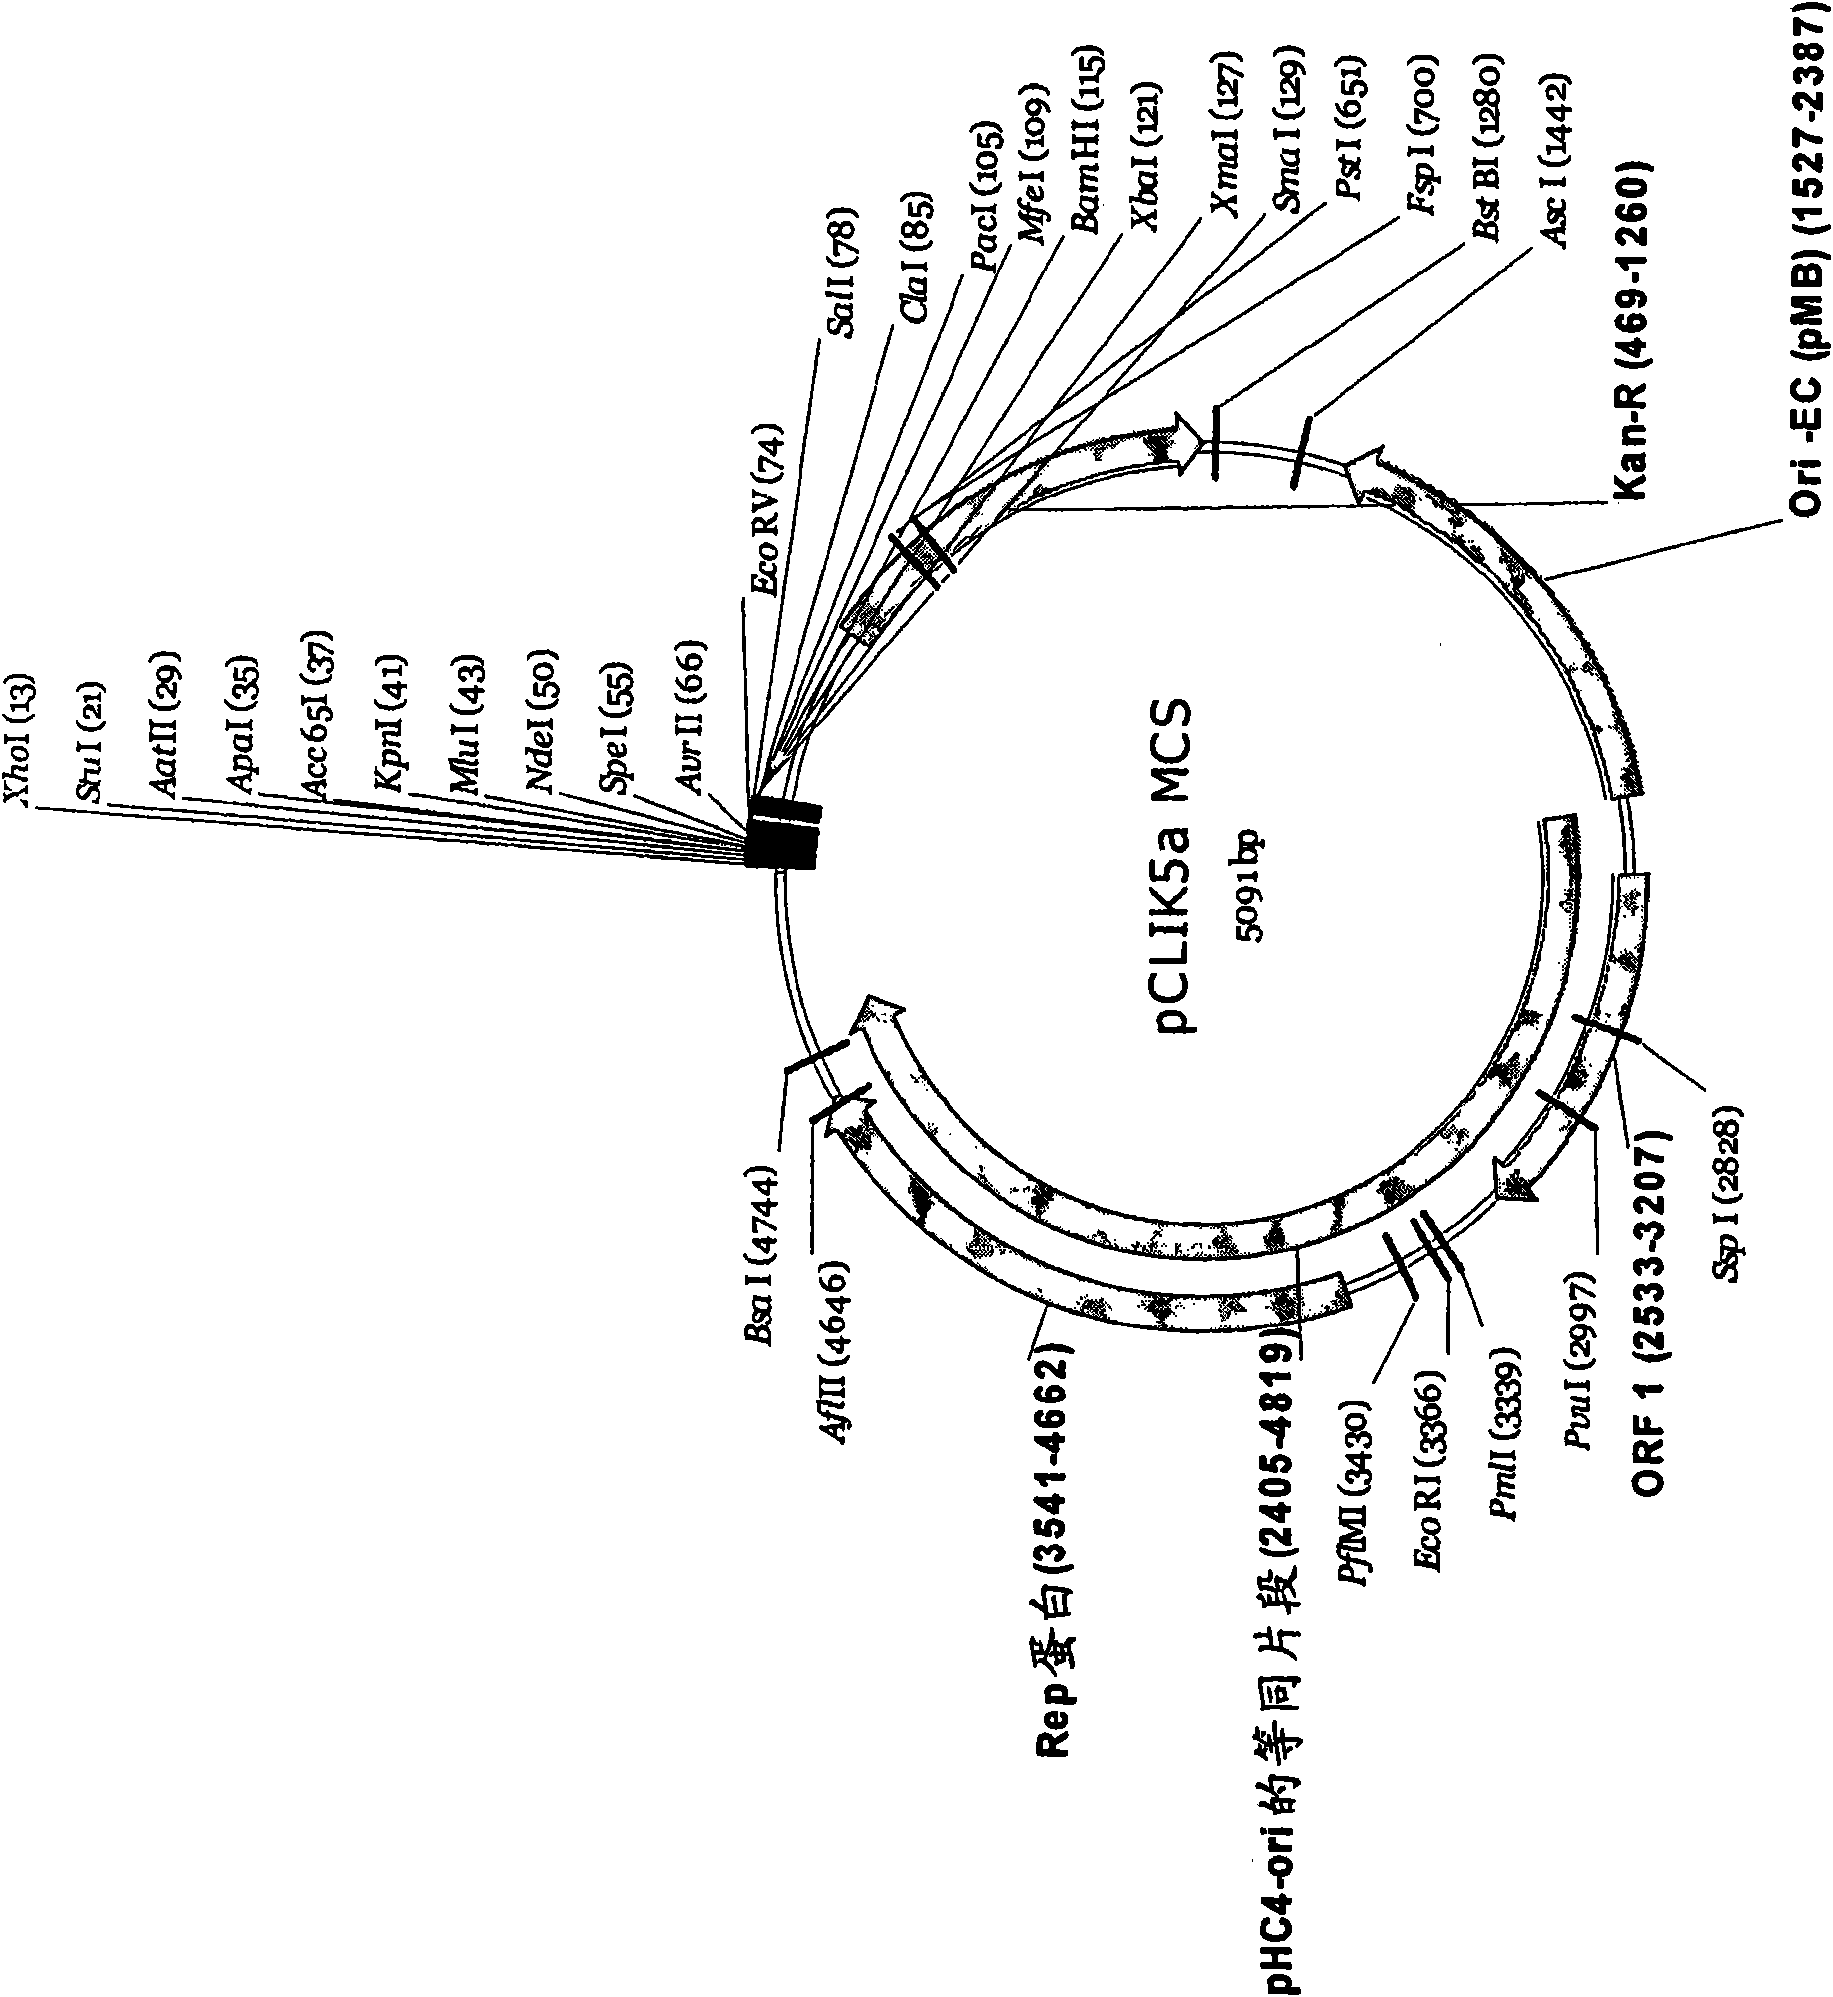 Process for the production of gamma-aminobutyric acid